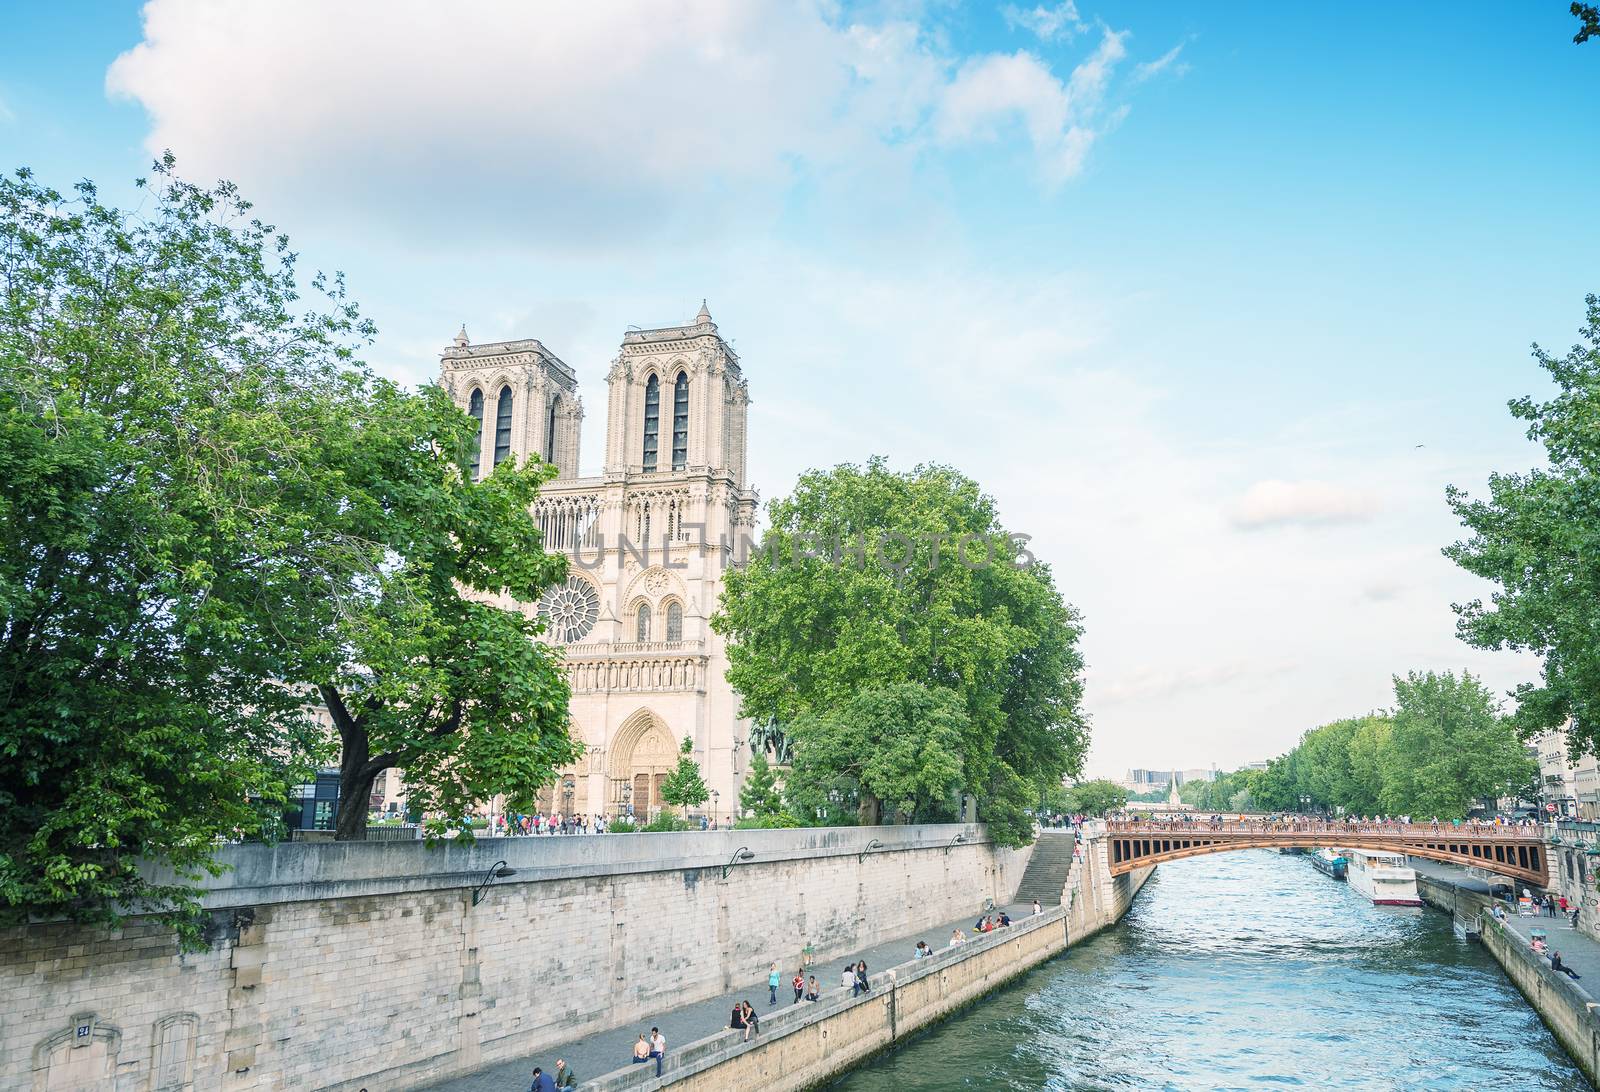 Notre Dame cathedral in Paris on a beautiful summer day.